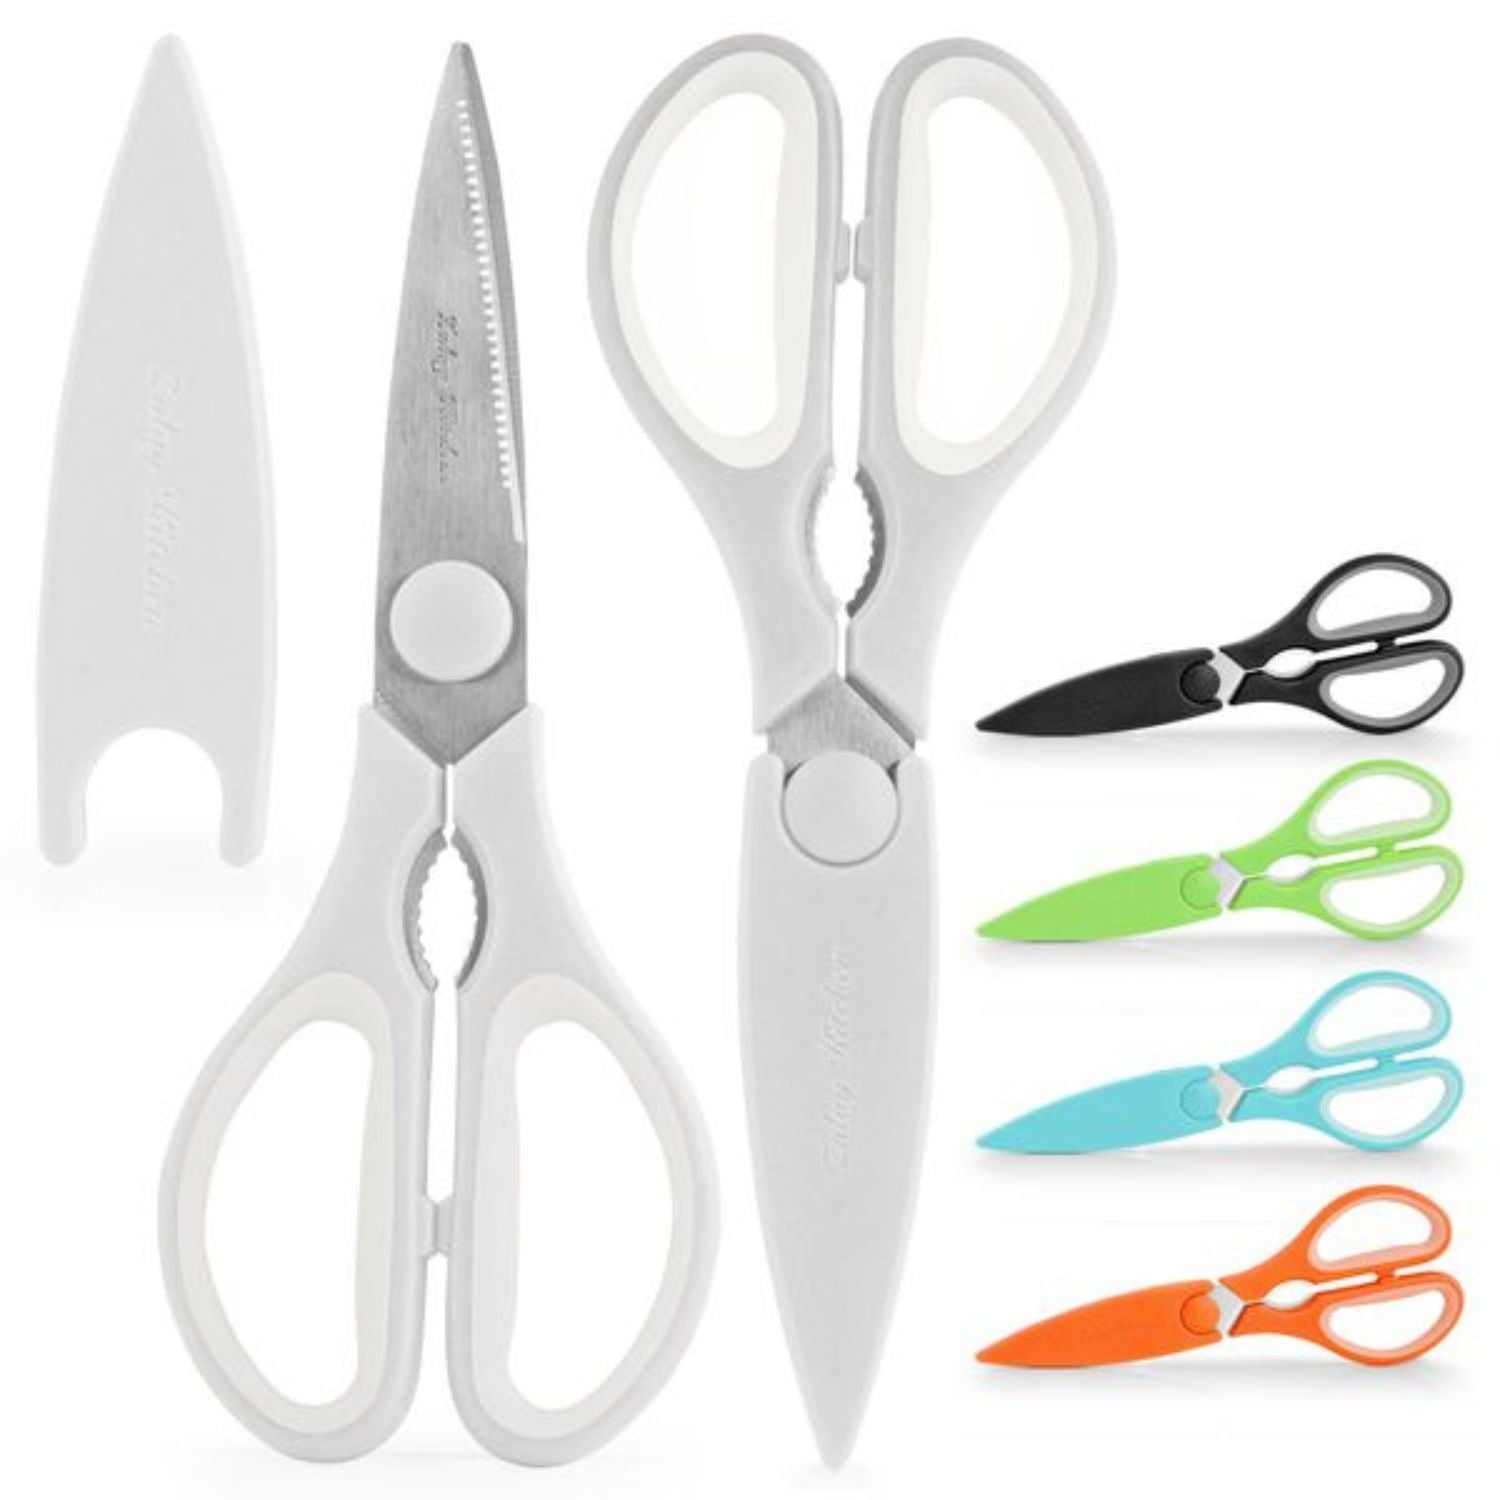 Stainless Steel Kitchen Shears With Protective Cover